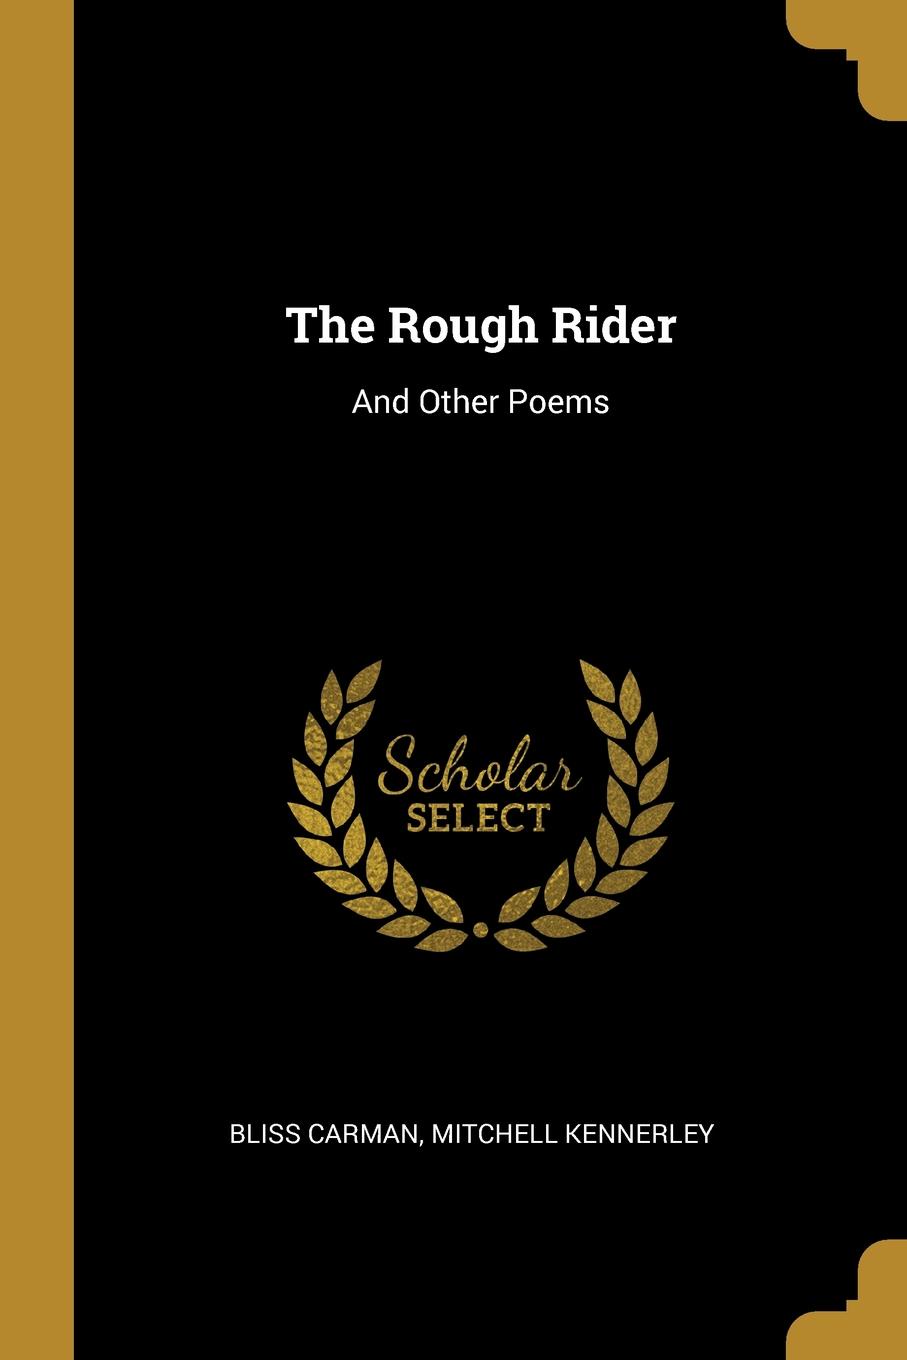 The Rough Rider. And Other Poems